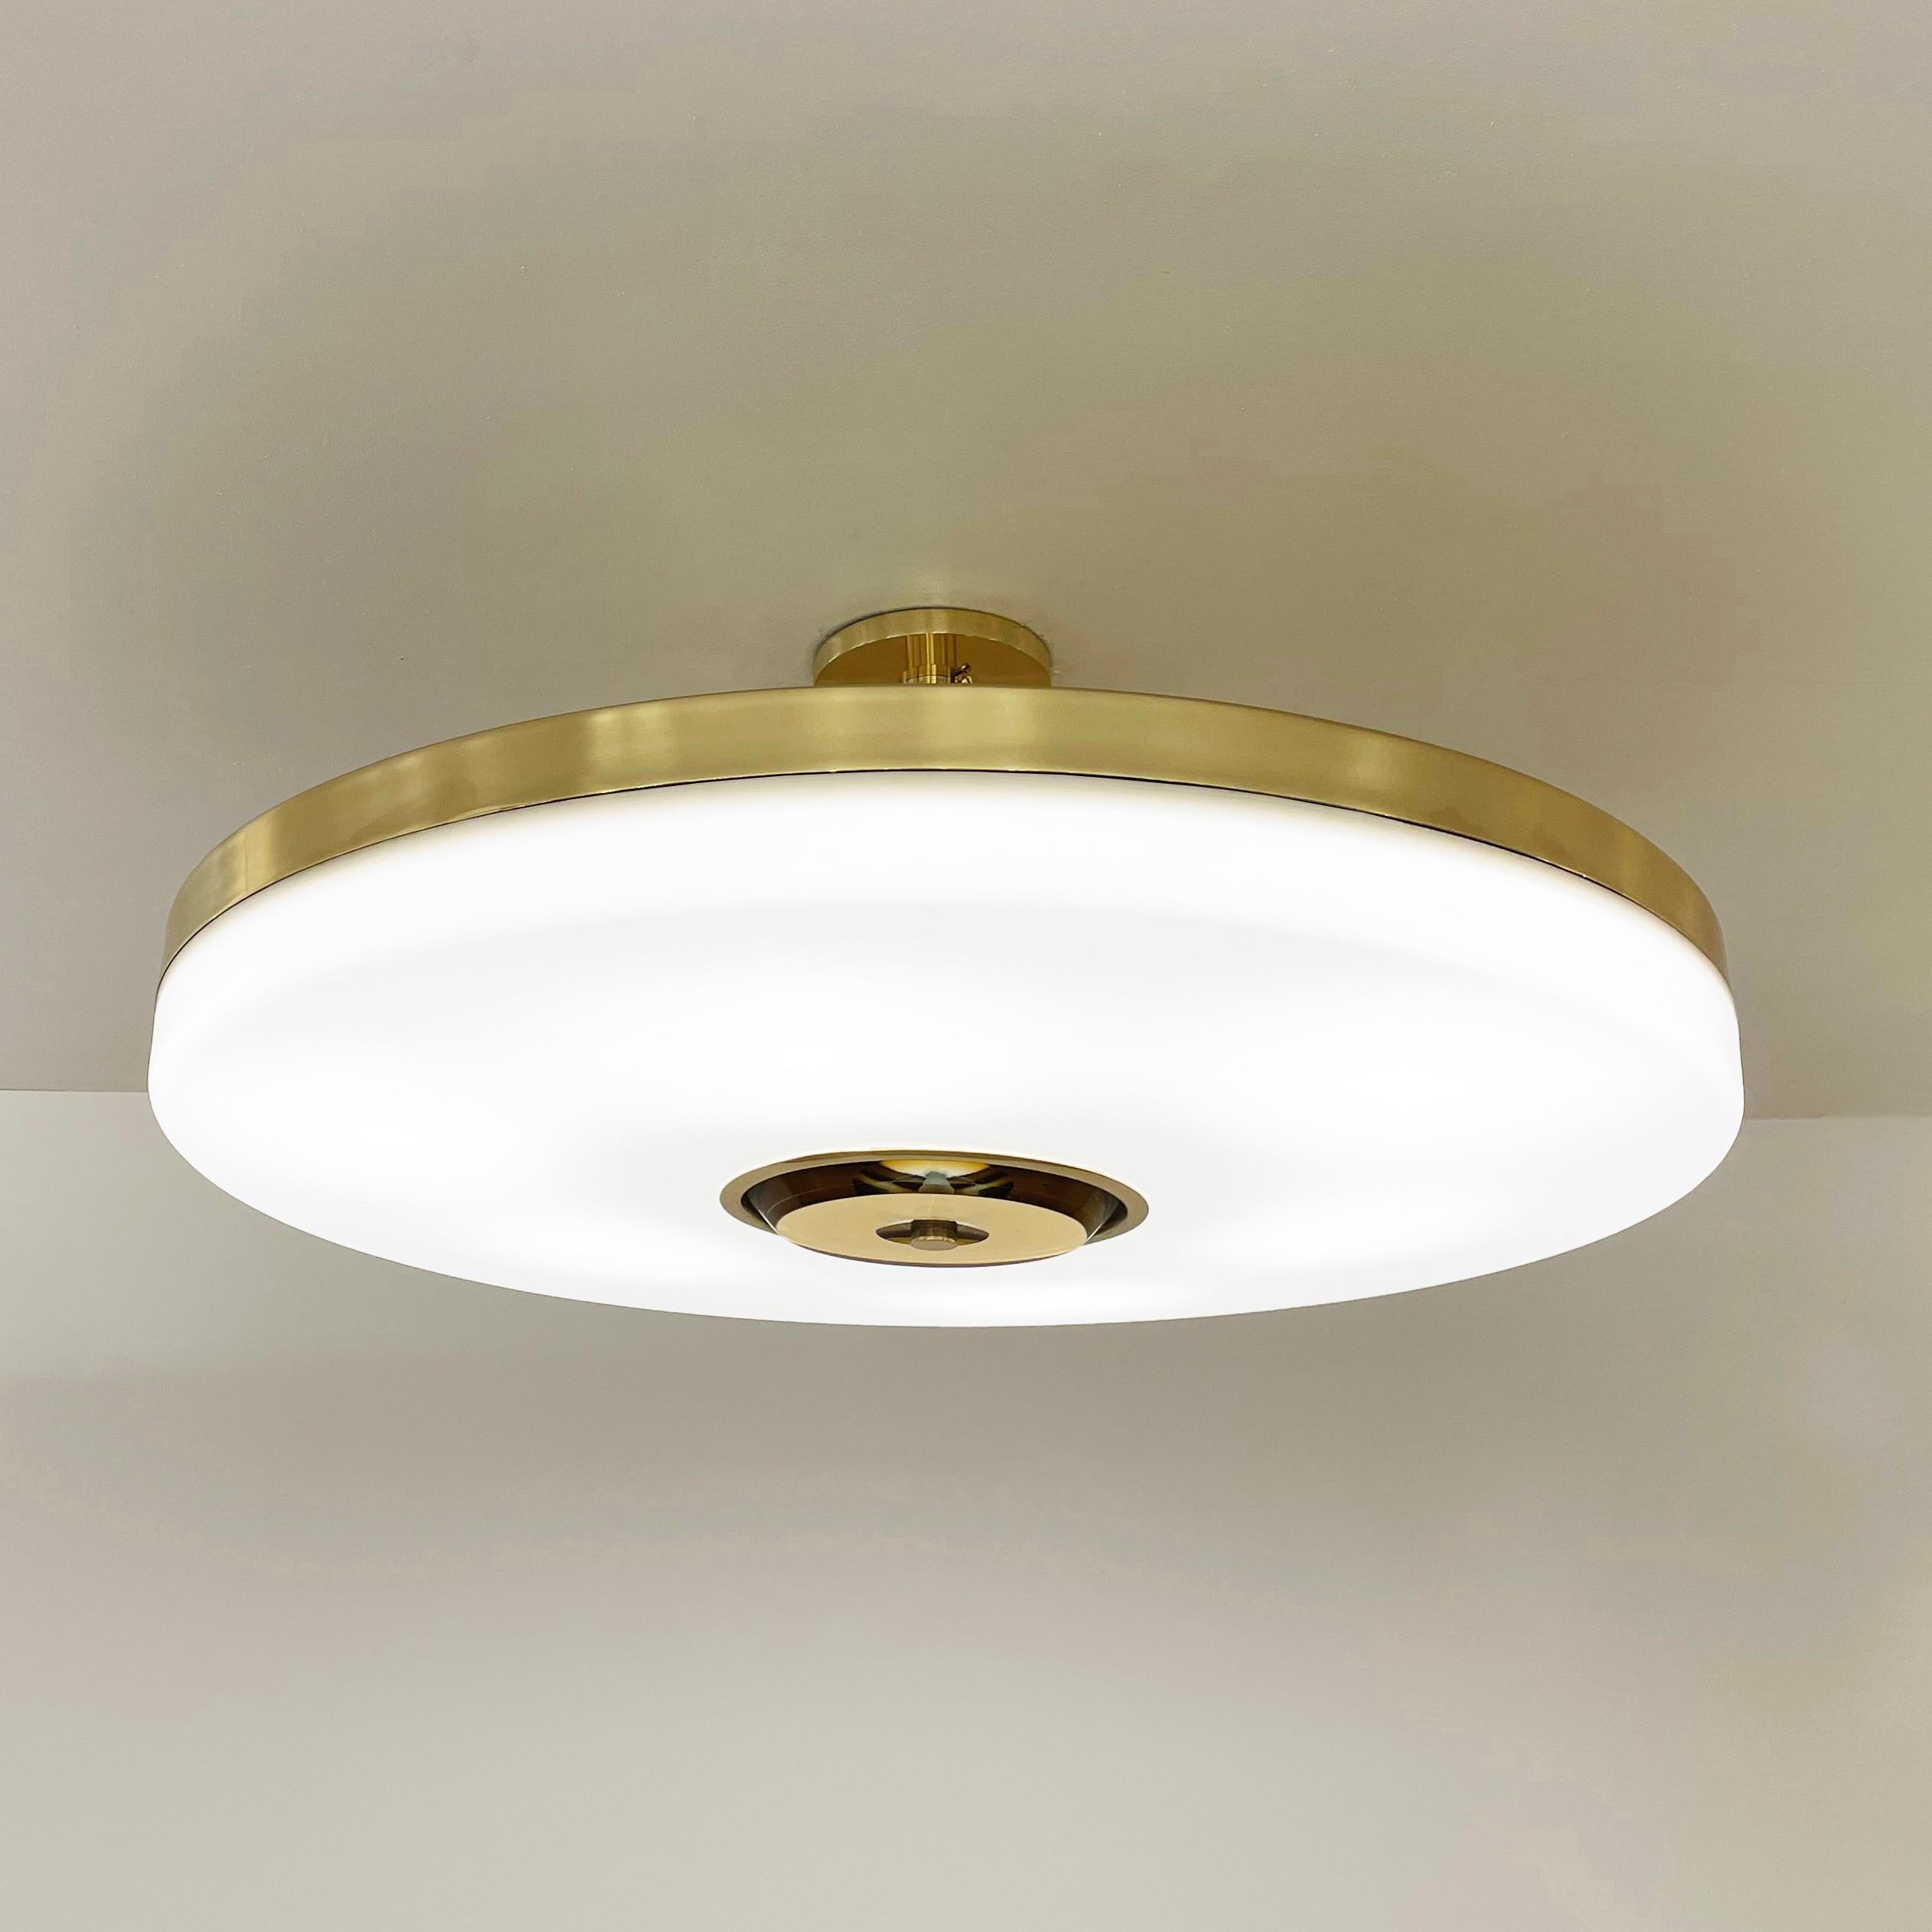 The Iris ceiling light is designed around an expansive acrylic shade with a hand carved glass center. This versatile fixture can be installed as a pendant on a stem or as a true flush mount. The first images show the fixture in our polished brass